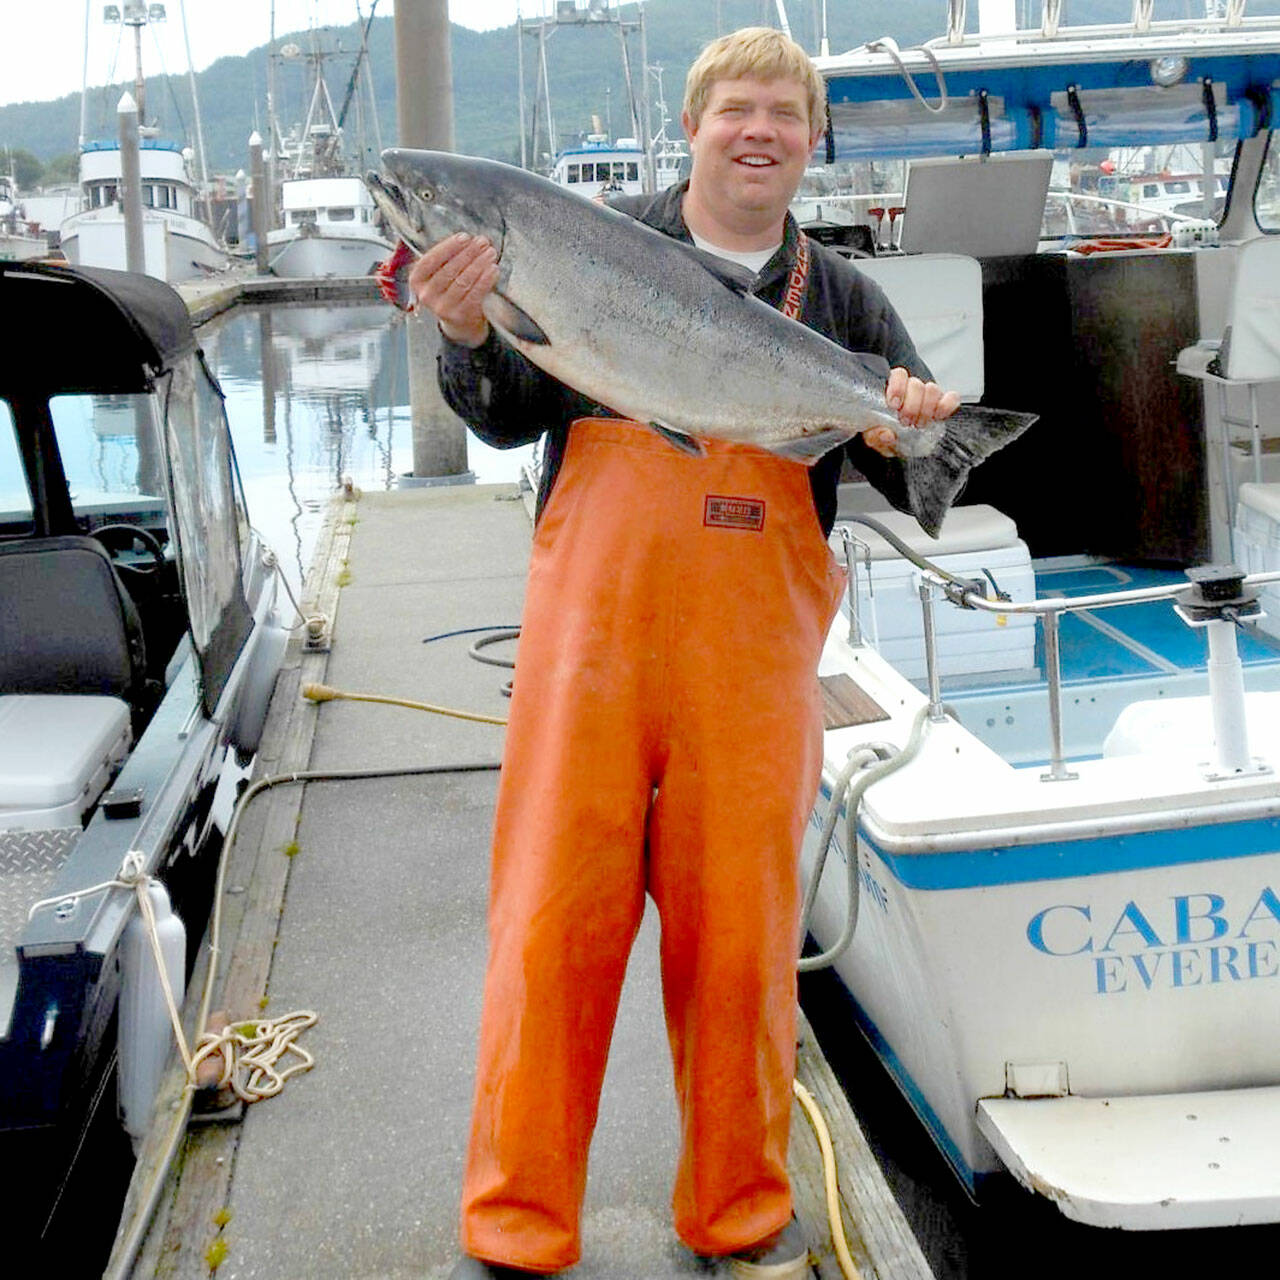 Excel Fishing Charters’ Tom Burlingame shows off a native king caught off Neah Bay during the 2022 salmon season.